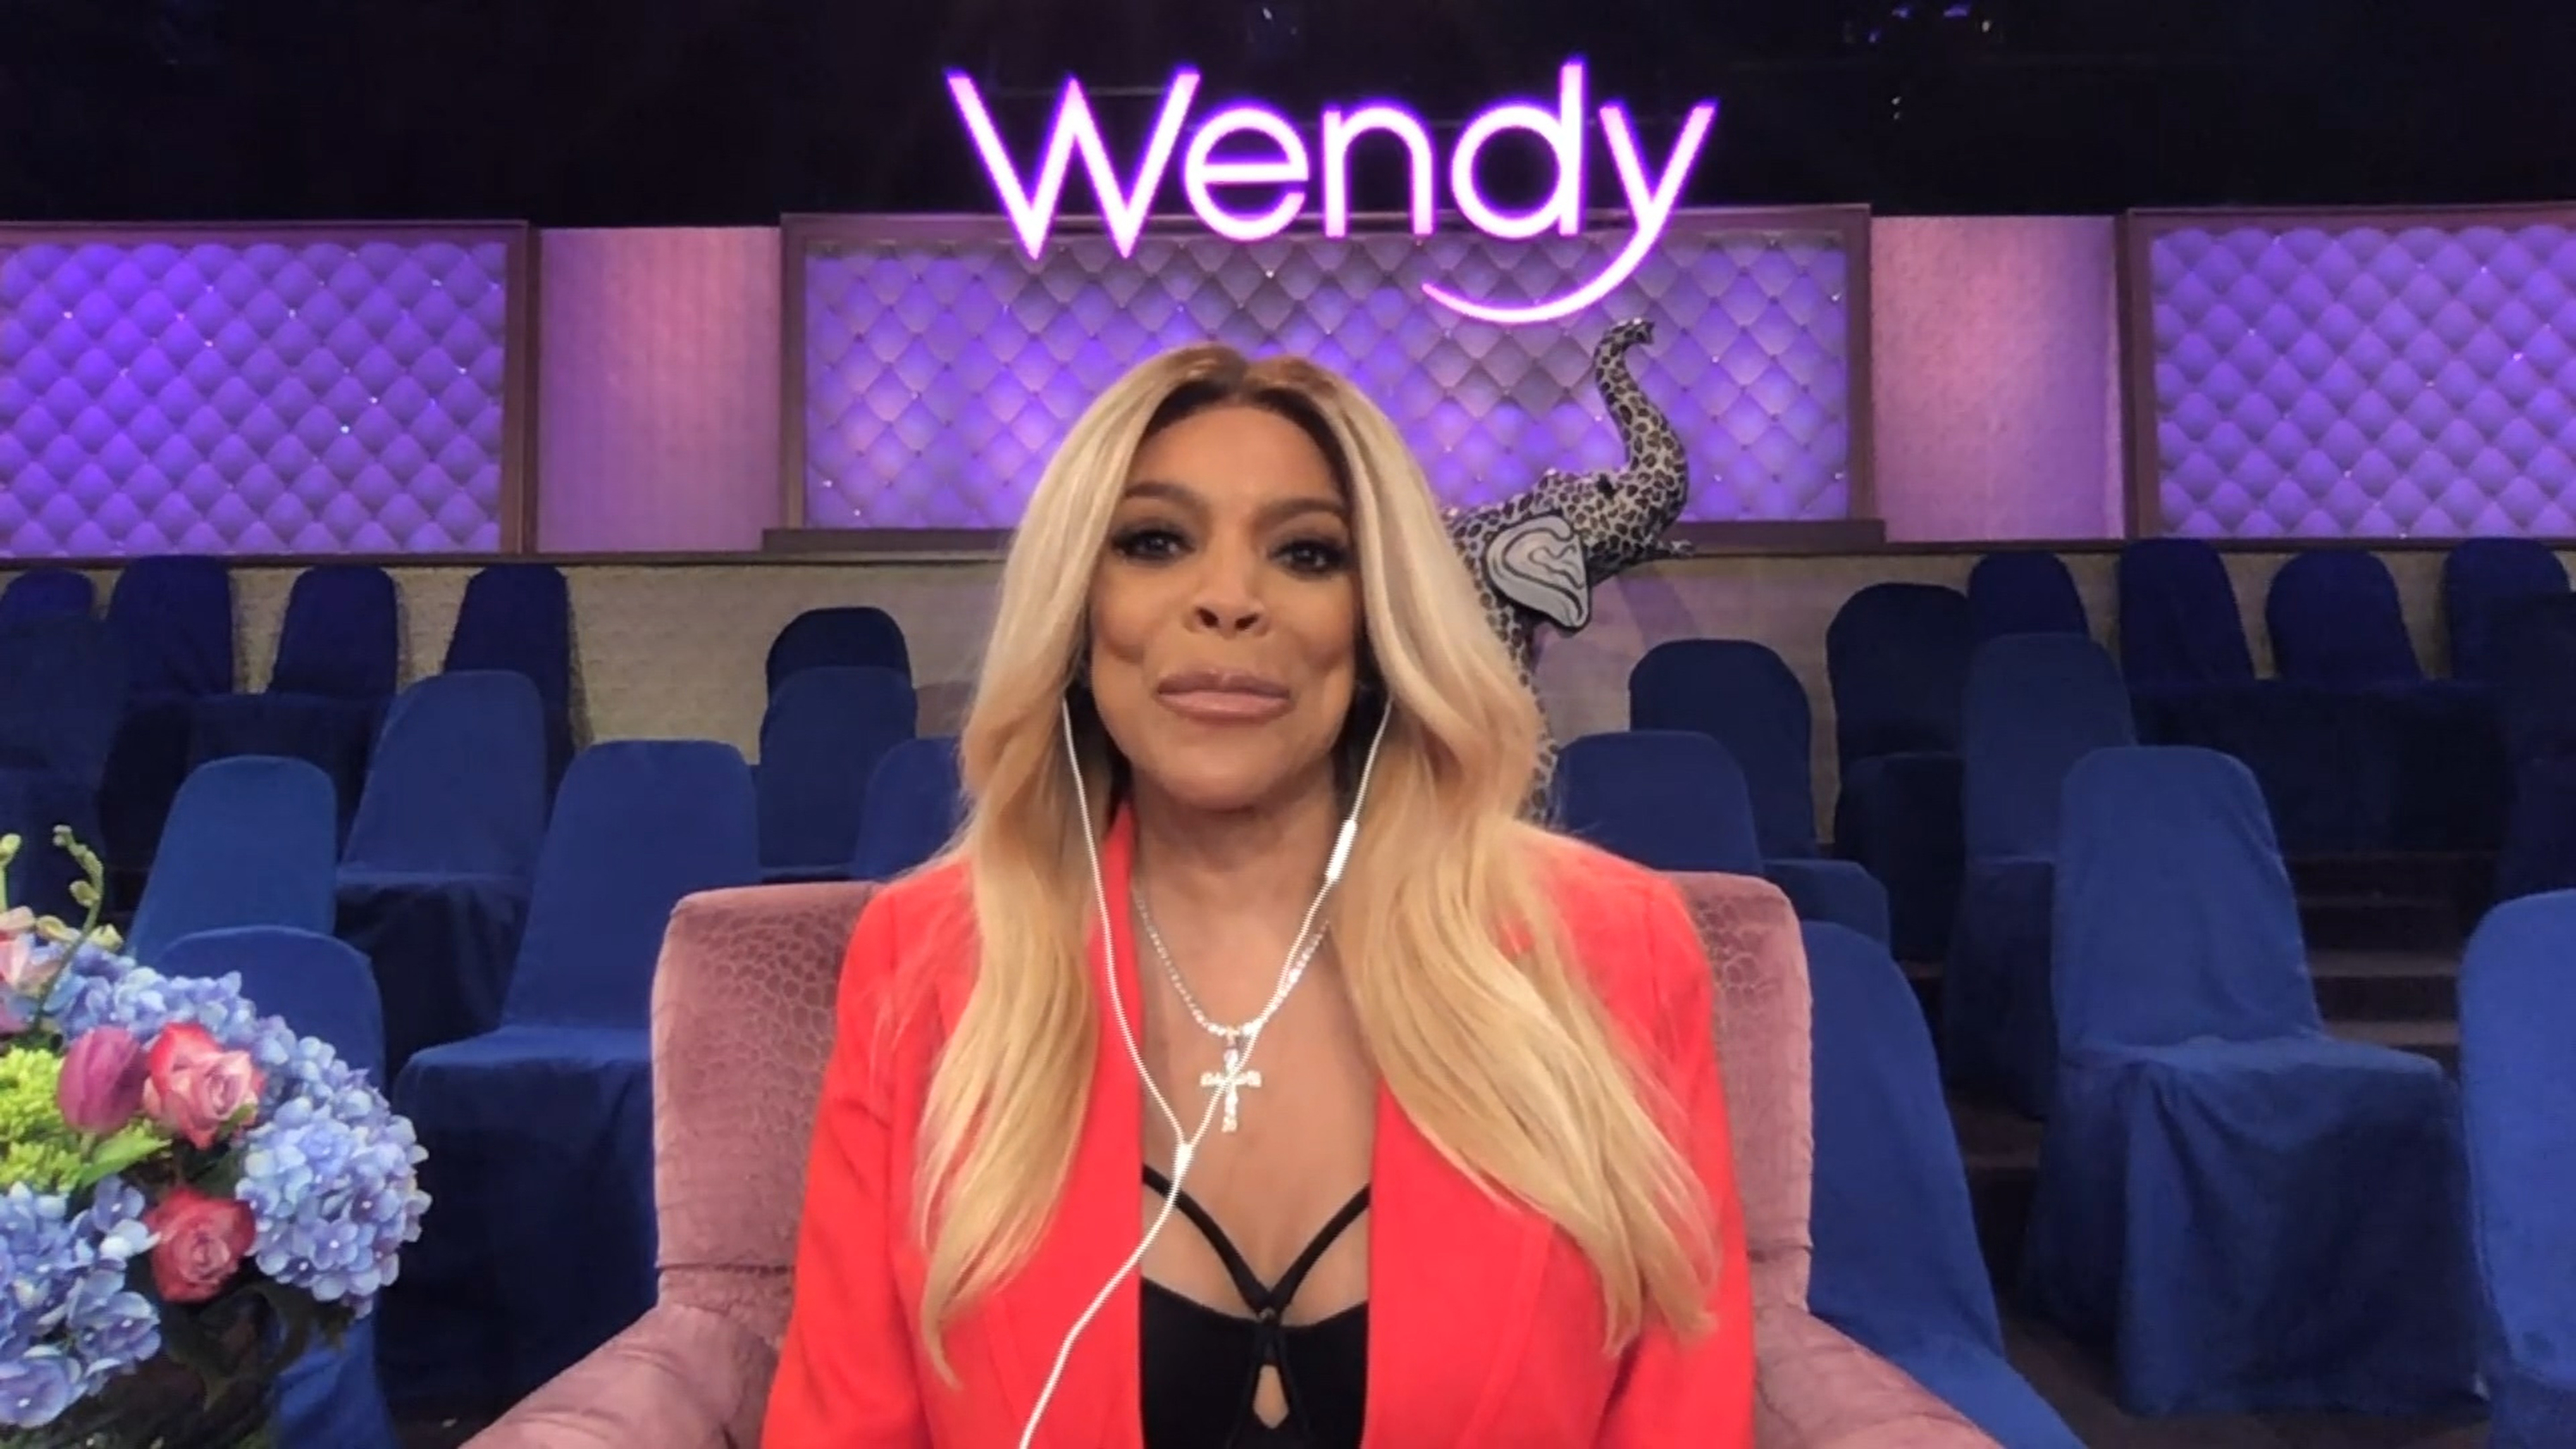 Wendy Williams seated in a studio, wearing a red blazer and black top, with a show logo in the background